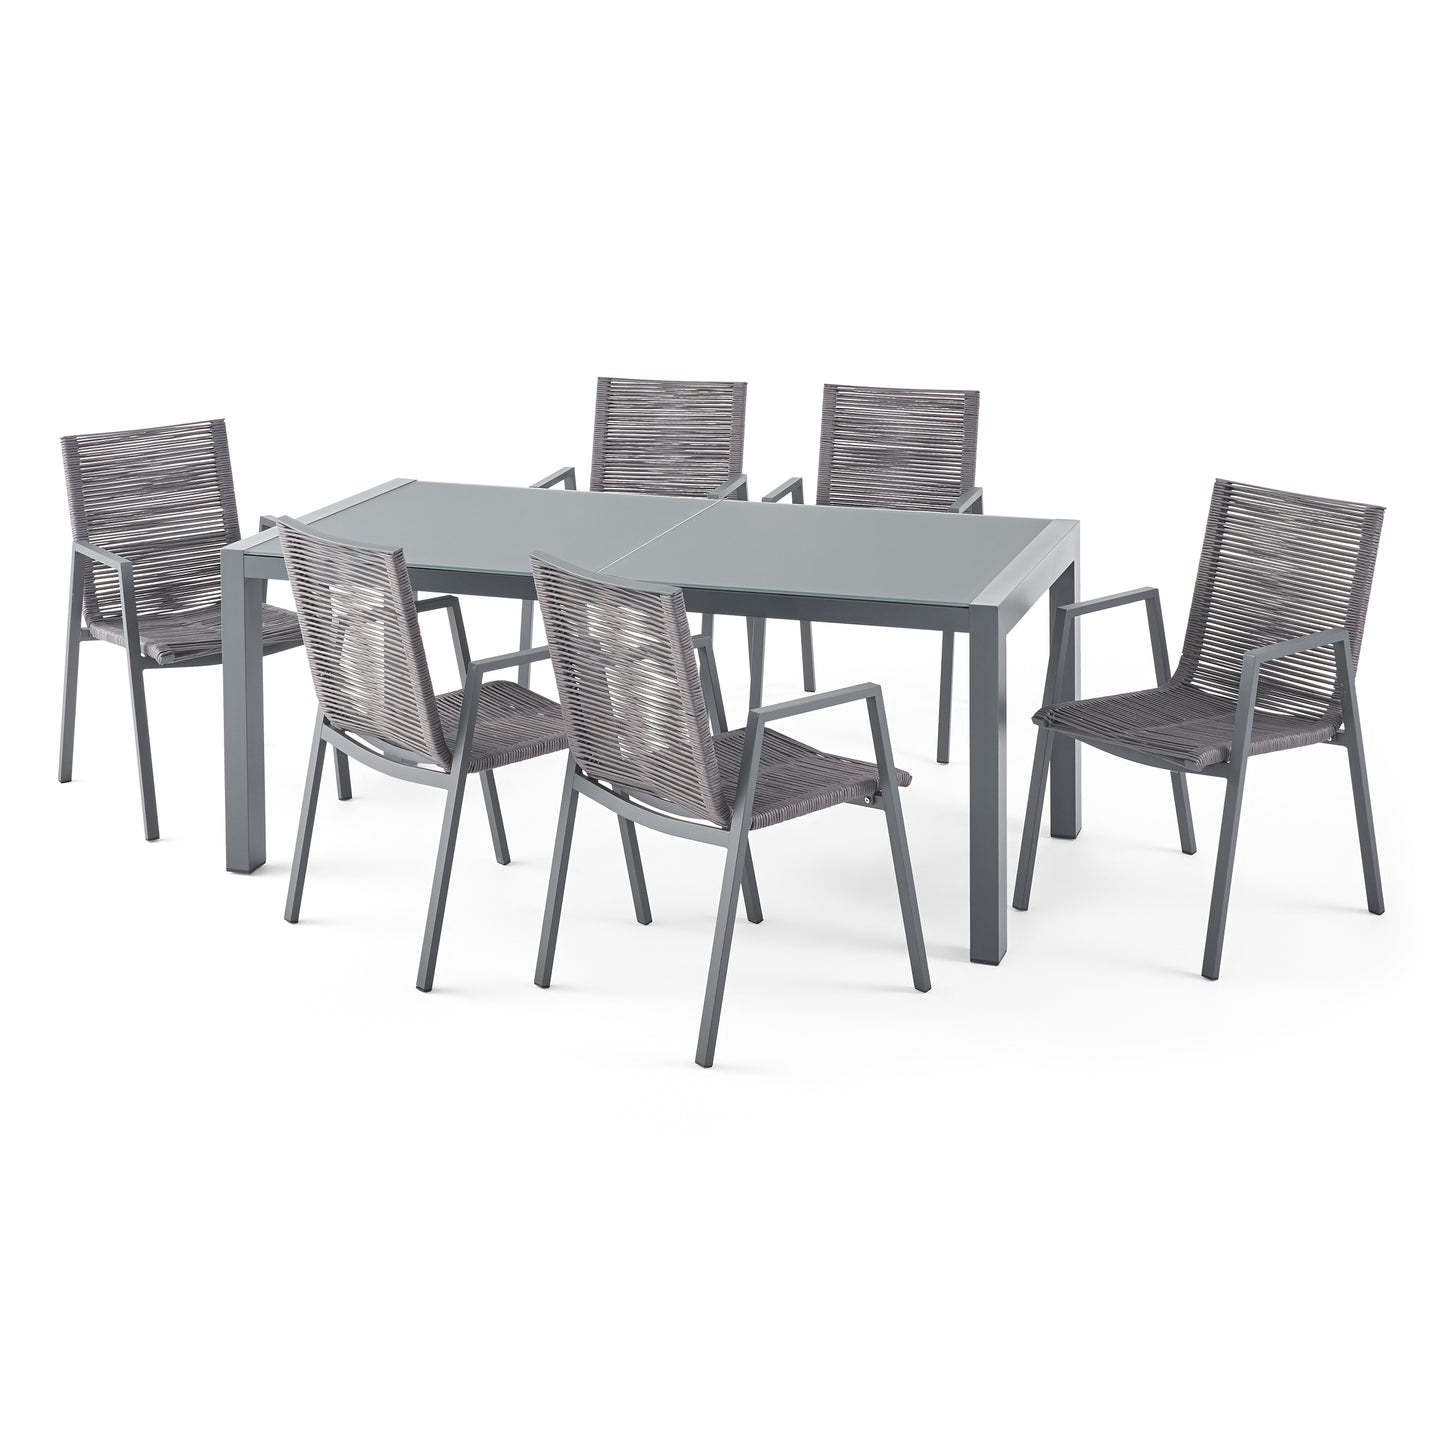 Amir Outdoor Modern 6 Seater Aluminum Dining Set with Tempered Glass Top